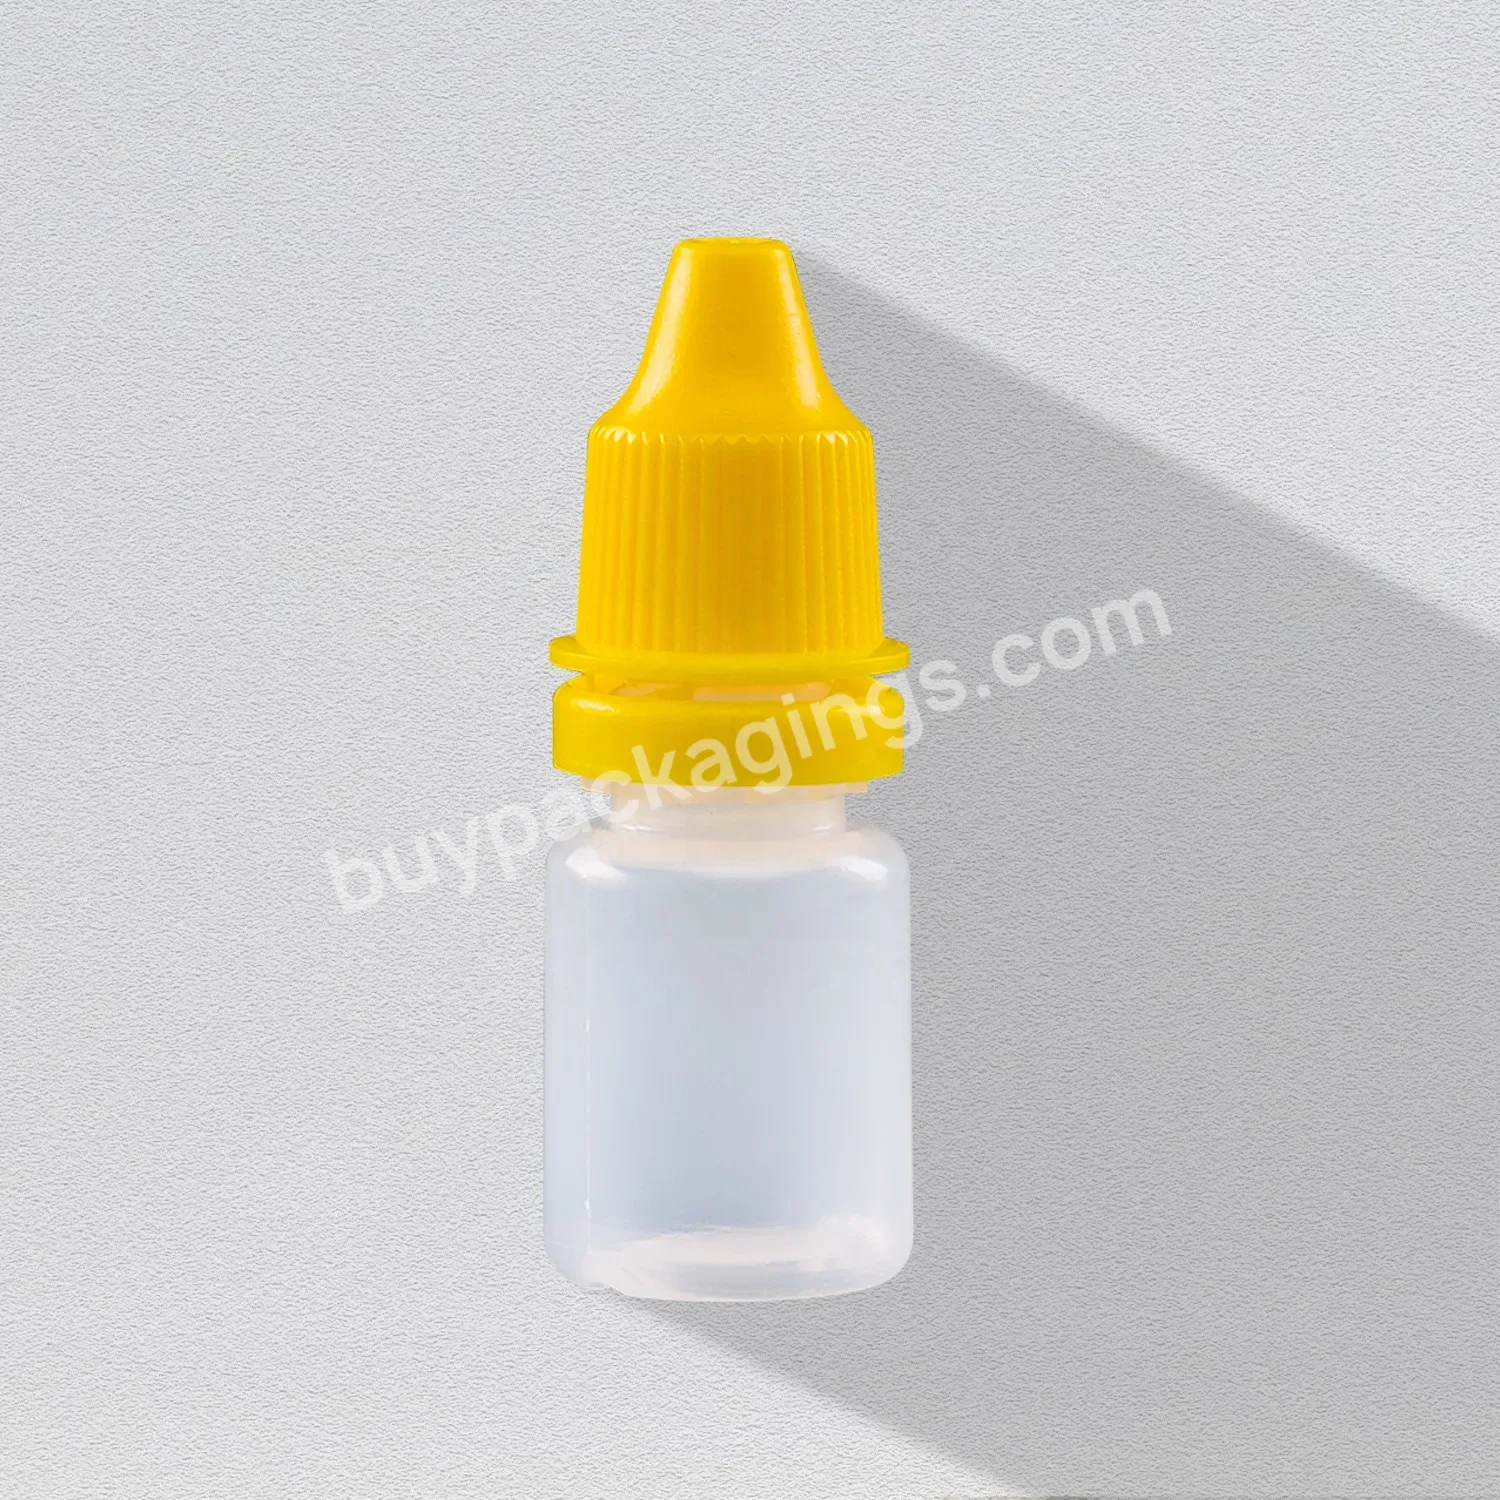 Plastic Eye Pharma Packaging Container Sterile 5ml 10ml White Plastic Empty Squeezable Eye Liquid Dropper Bottles With Screw Cap - Buy Eye Medicine Package Empty 5ml 10ml Opaque Ldpe Squeeze Plastic Dropper Bottle For Eye Drops,Ldpe Eye Drops Contain